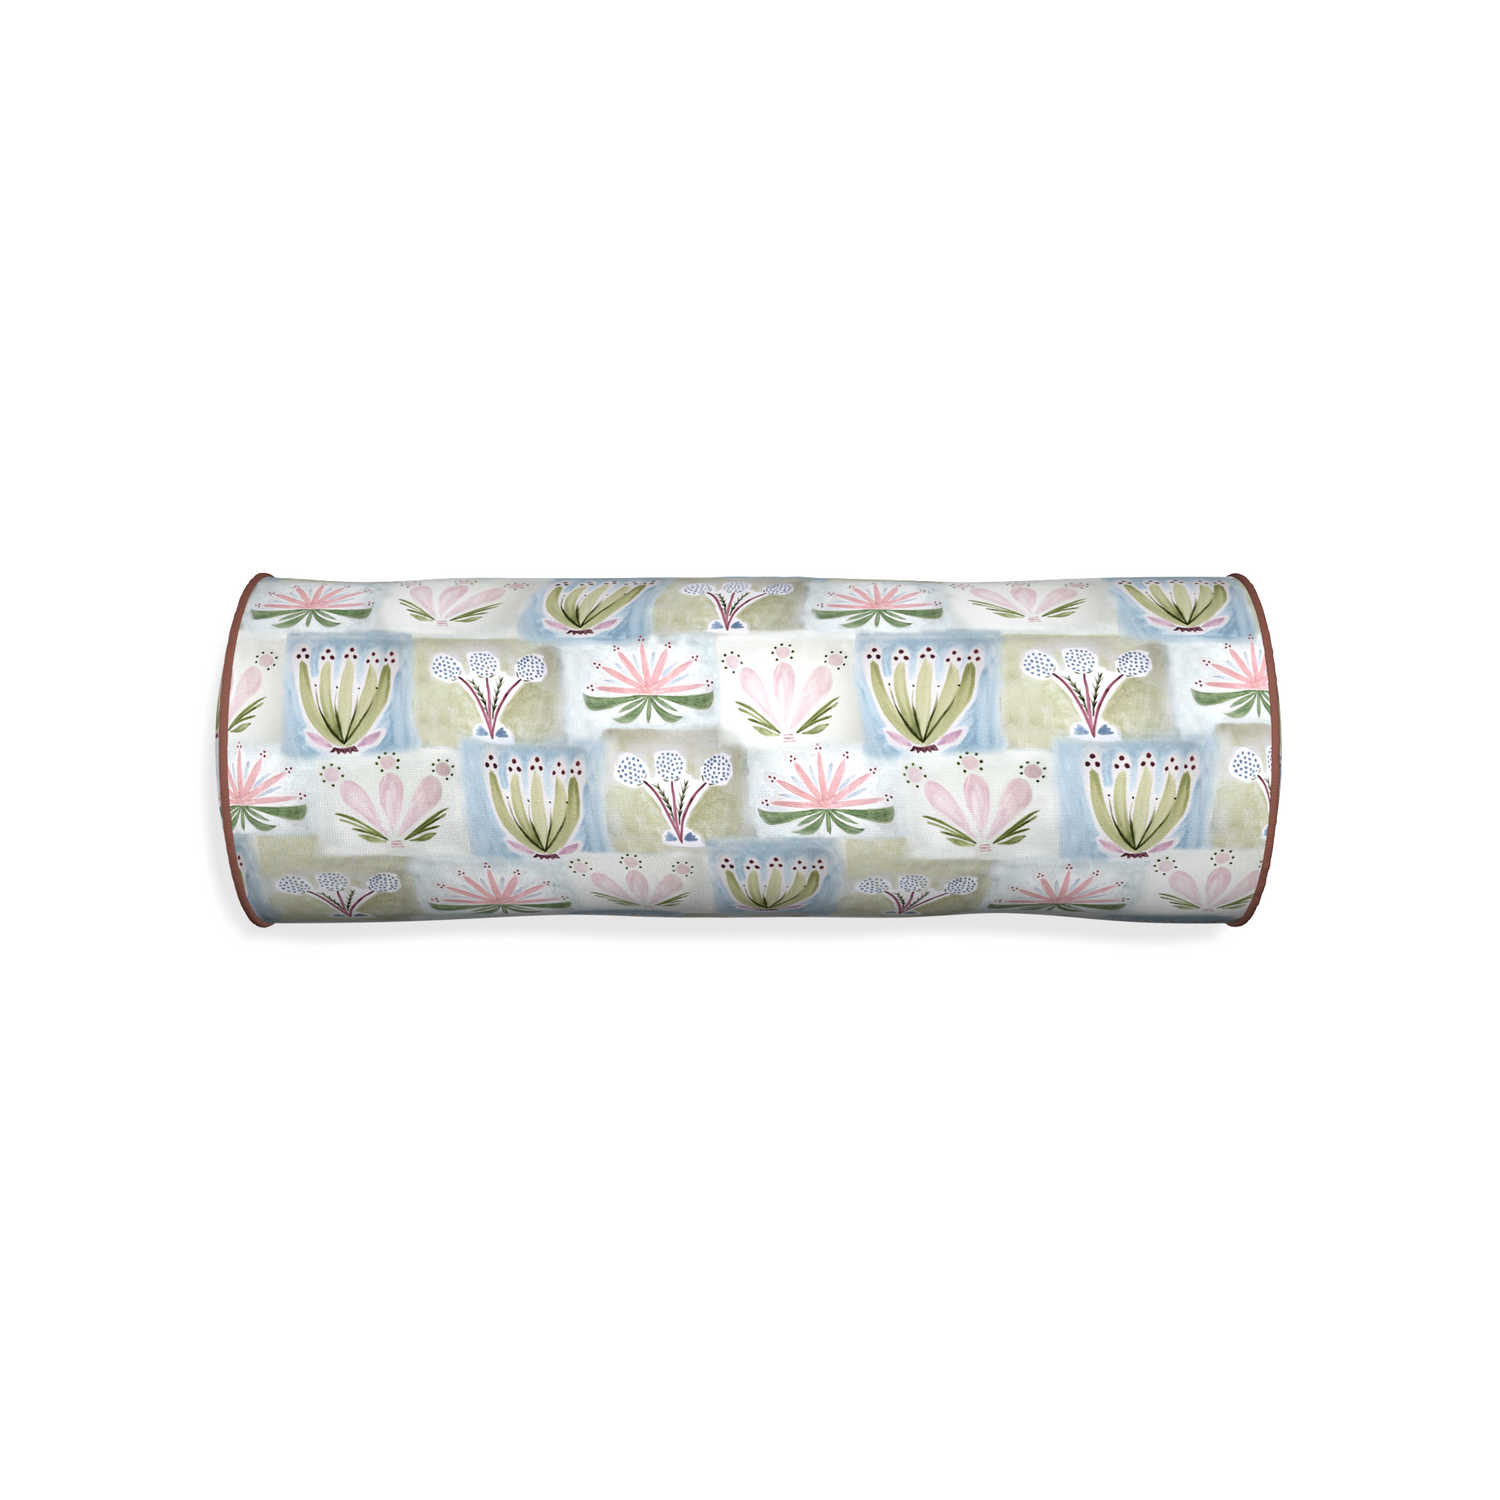 Bolster harper custom hand-painted floralpillow with w piping on white background